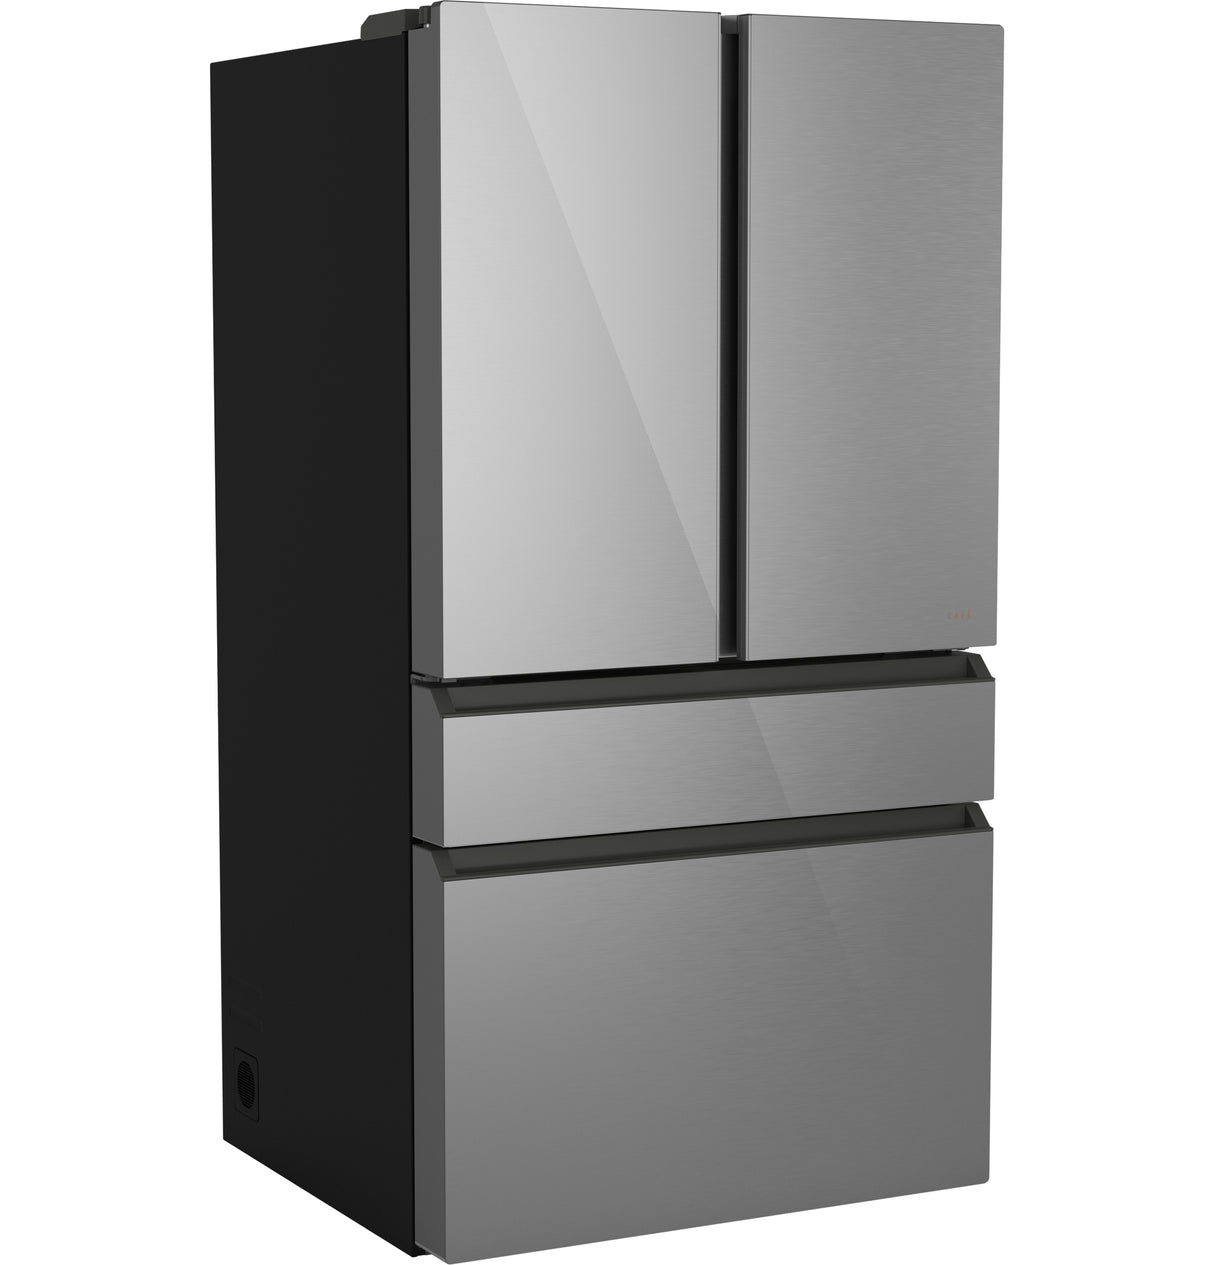 Caf(eback)(TM) ENERGY STAR(R) 28.7 Cu. Ft. Smart 4-Door French-Door Refrigerator in Platinum Glass With Dual-Dispense AutoFill Pitcher - (CGE29DM5TS5)